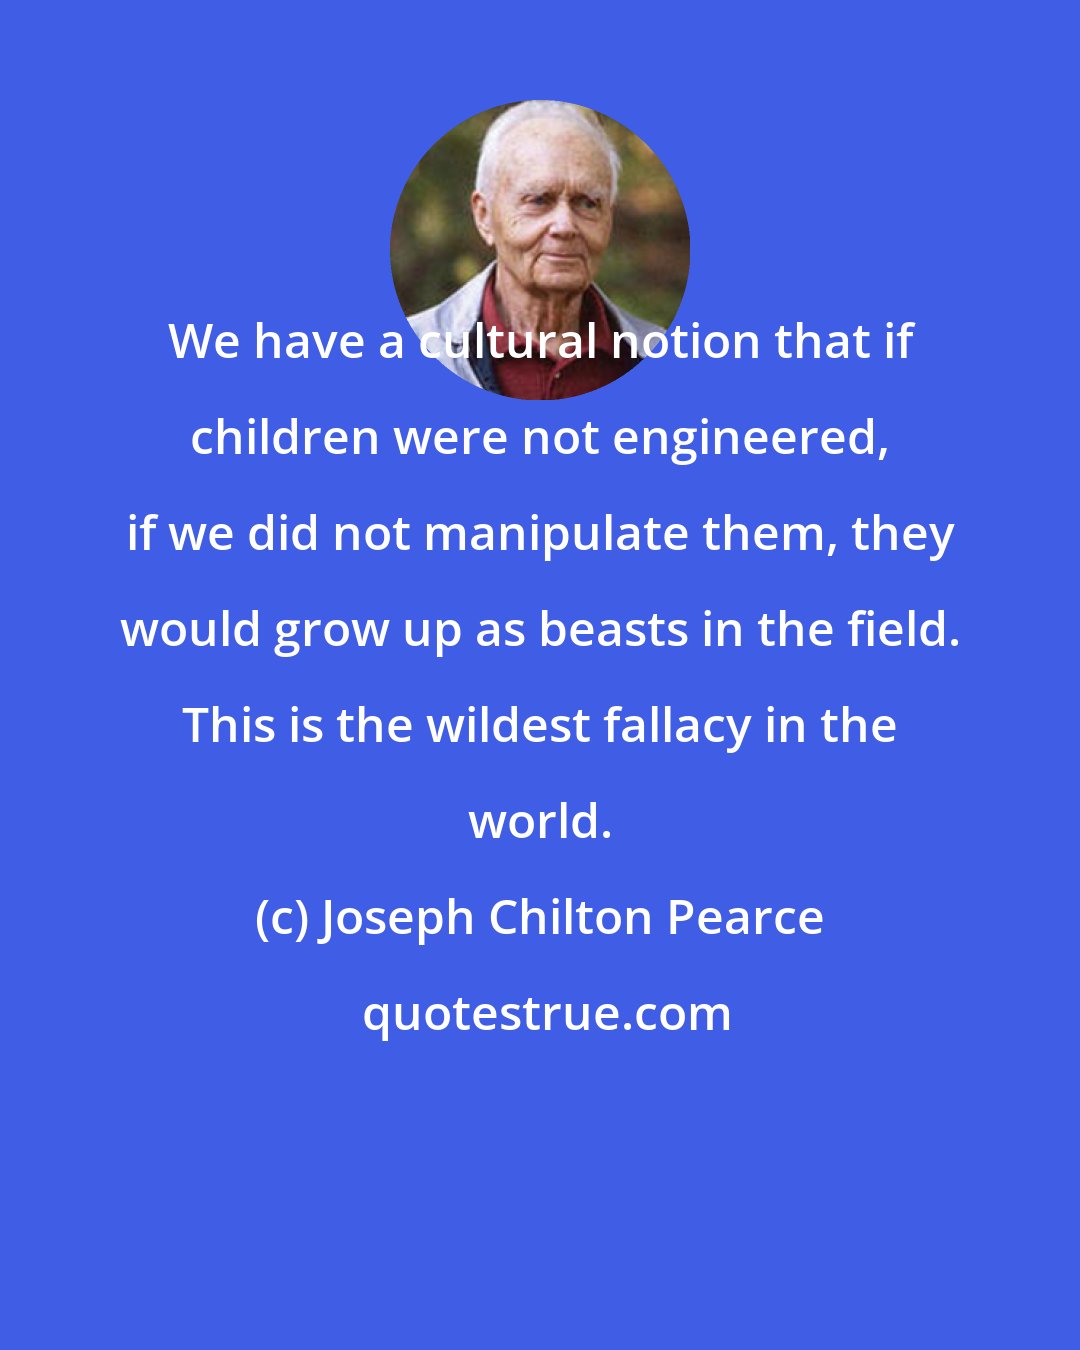 Joseph Chilton Pearce: We have a cultural notion that if children were not engineered, if we did not manipulate them, they would grow up as beasts in the field. This is the wildest fallacy in the world.